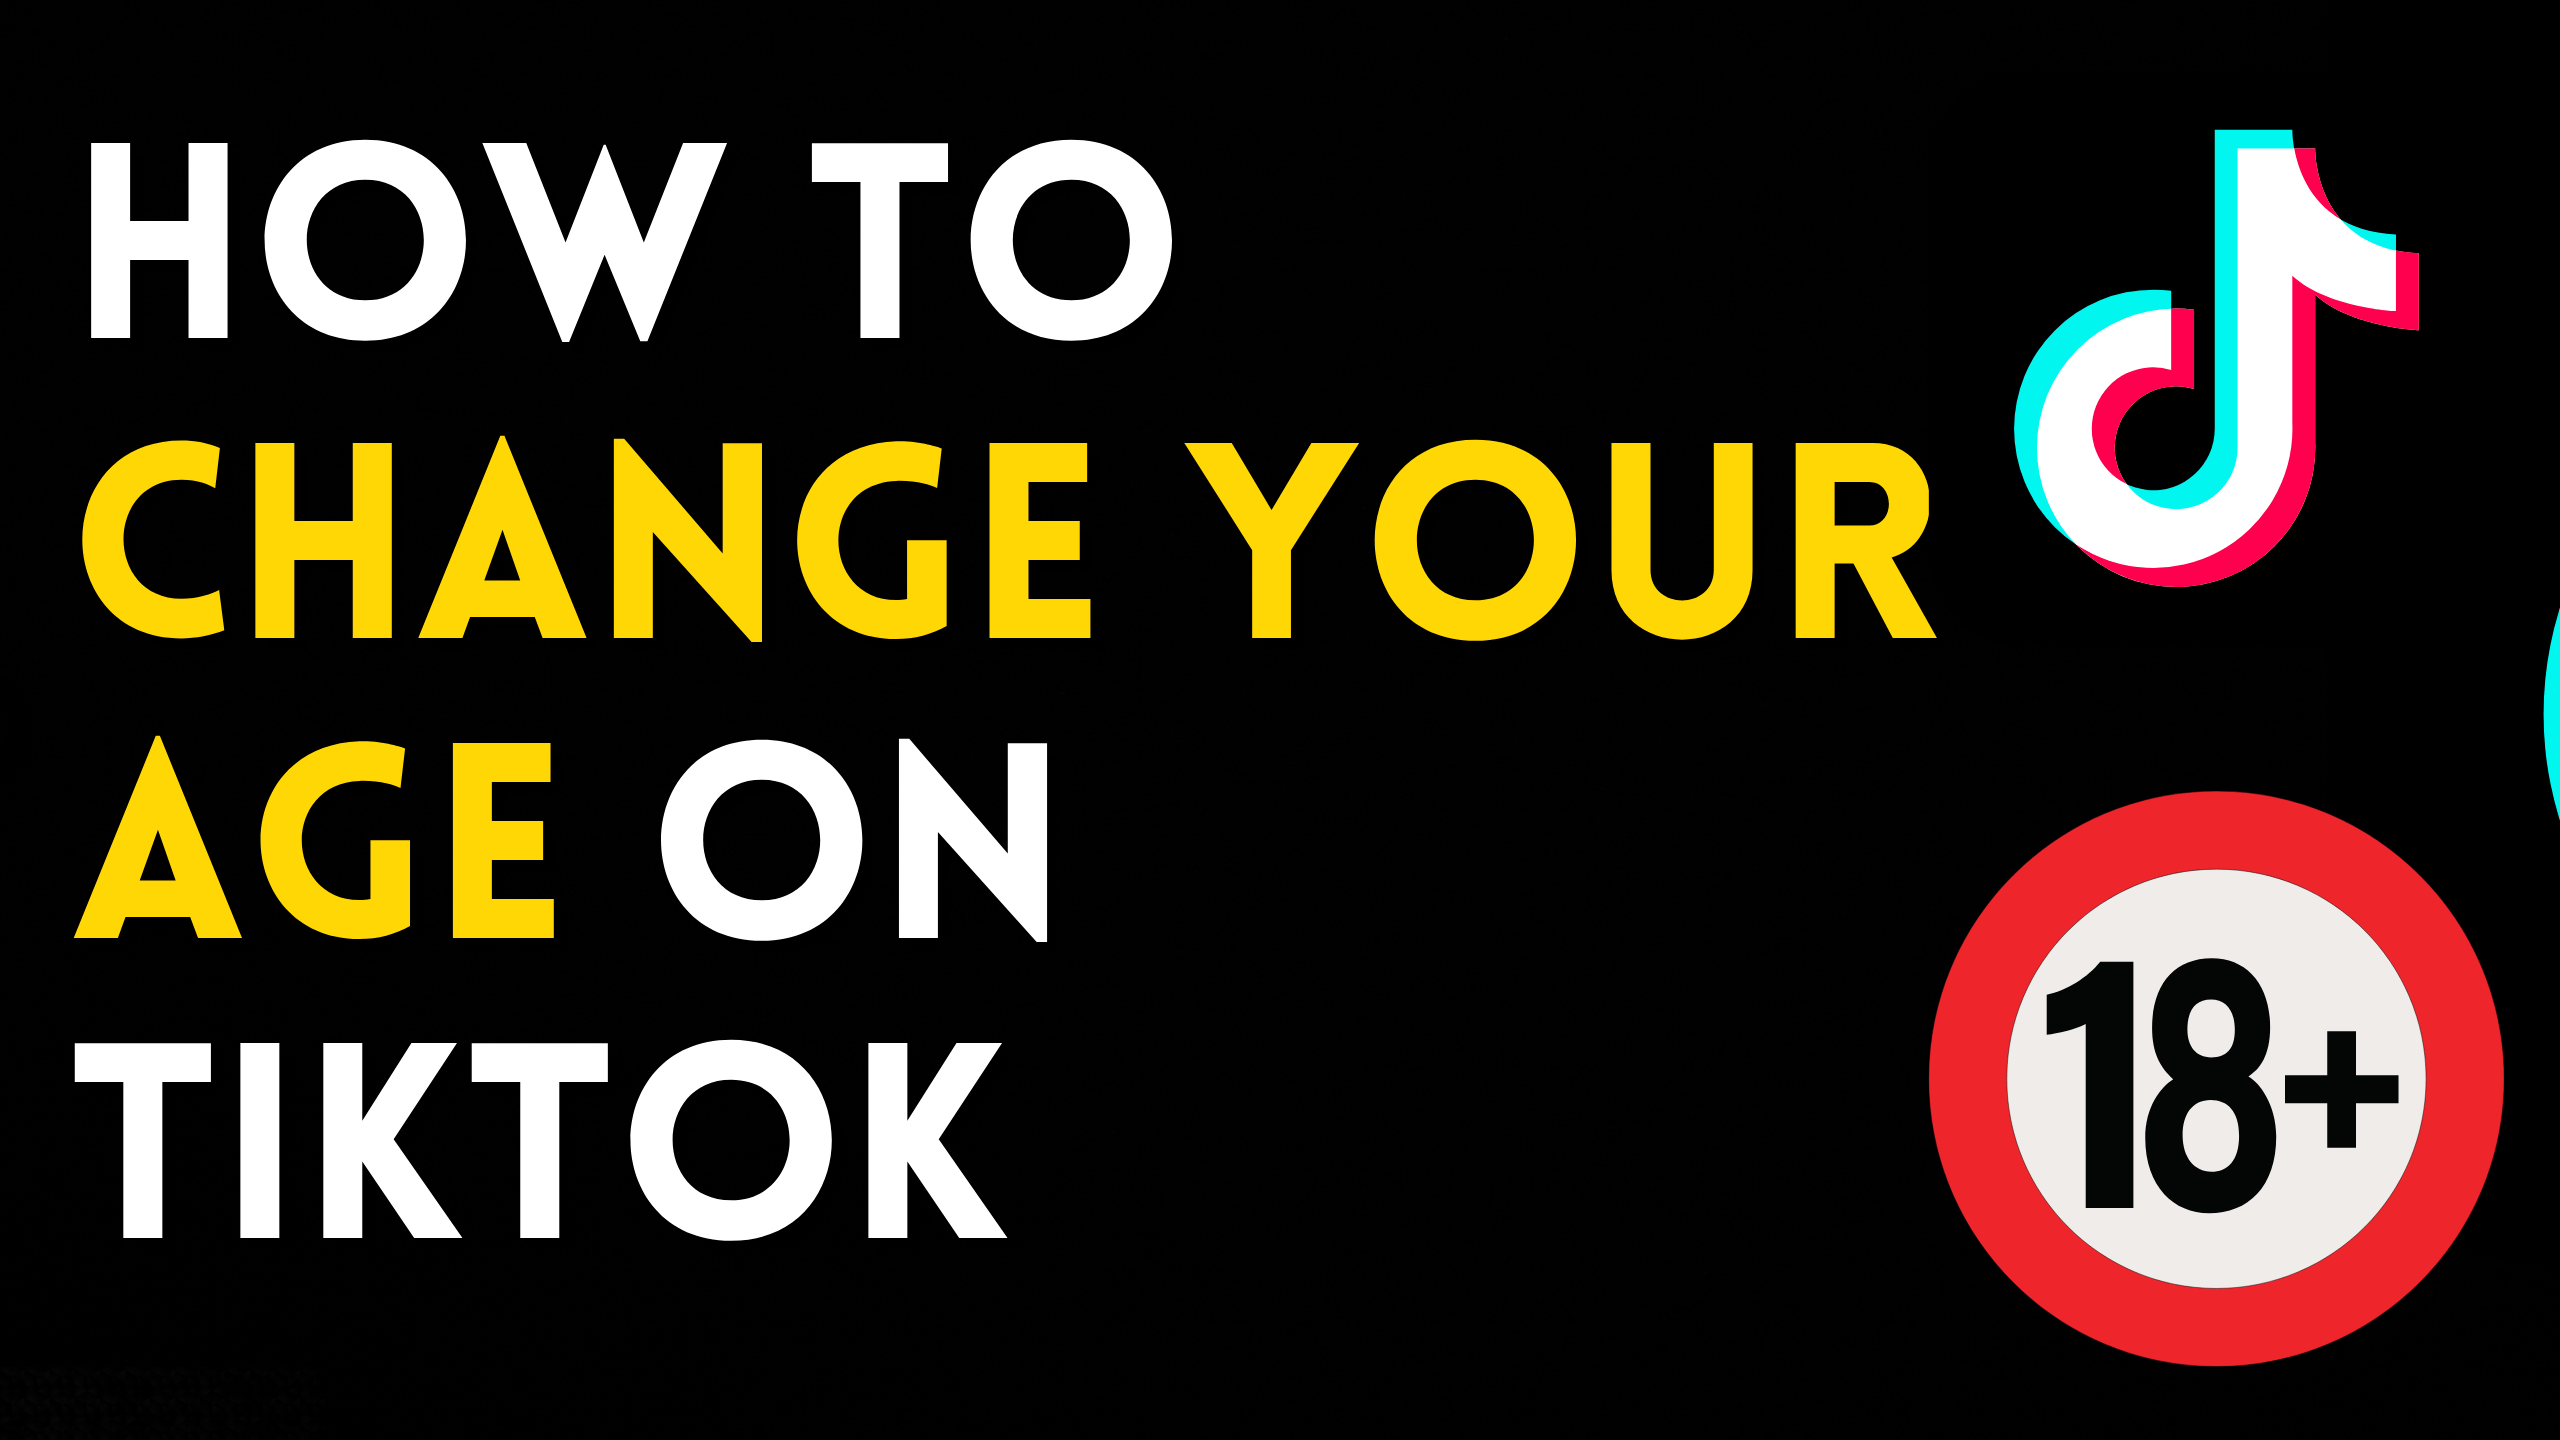 How to Change Your Age on TikTok? Explained with Pictures